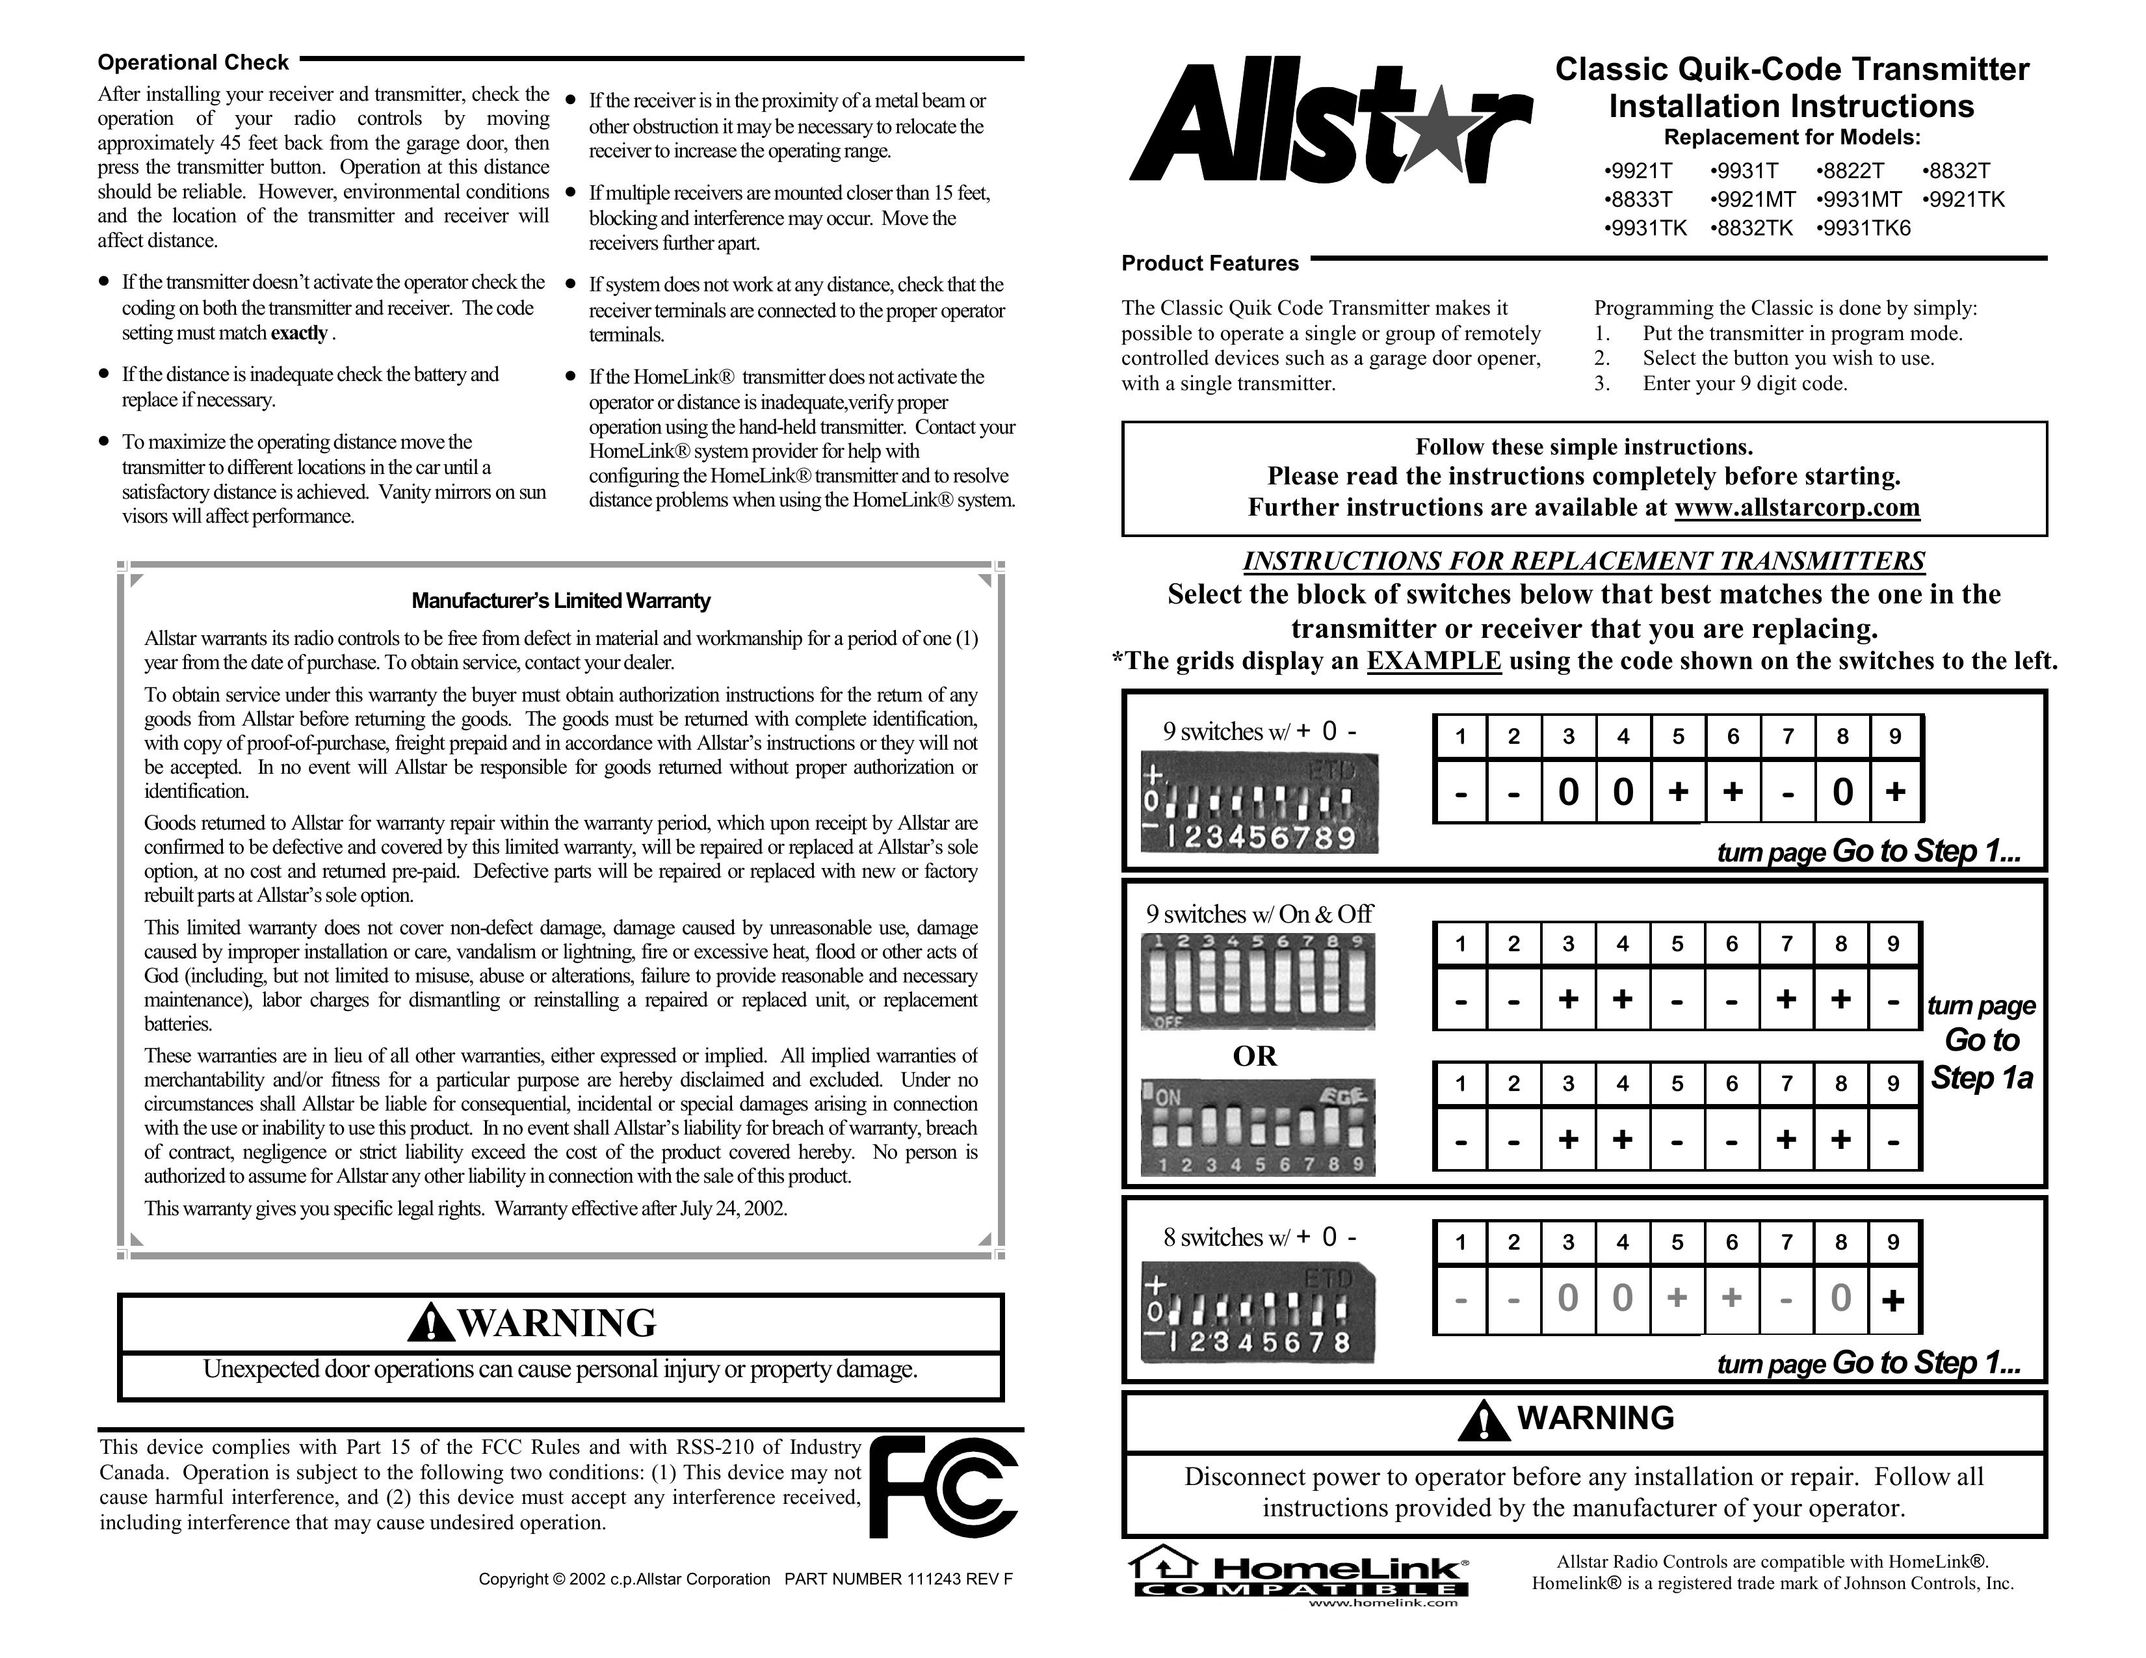 Allstar Products Group 8833T Satellite Radio User Manual